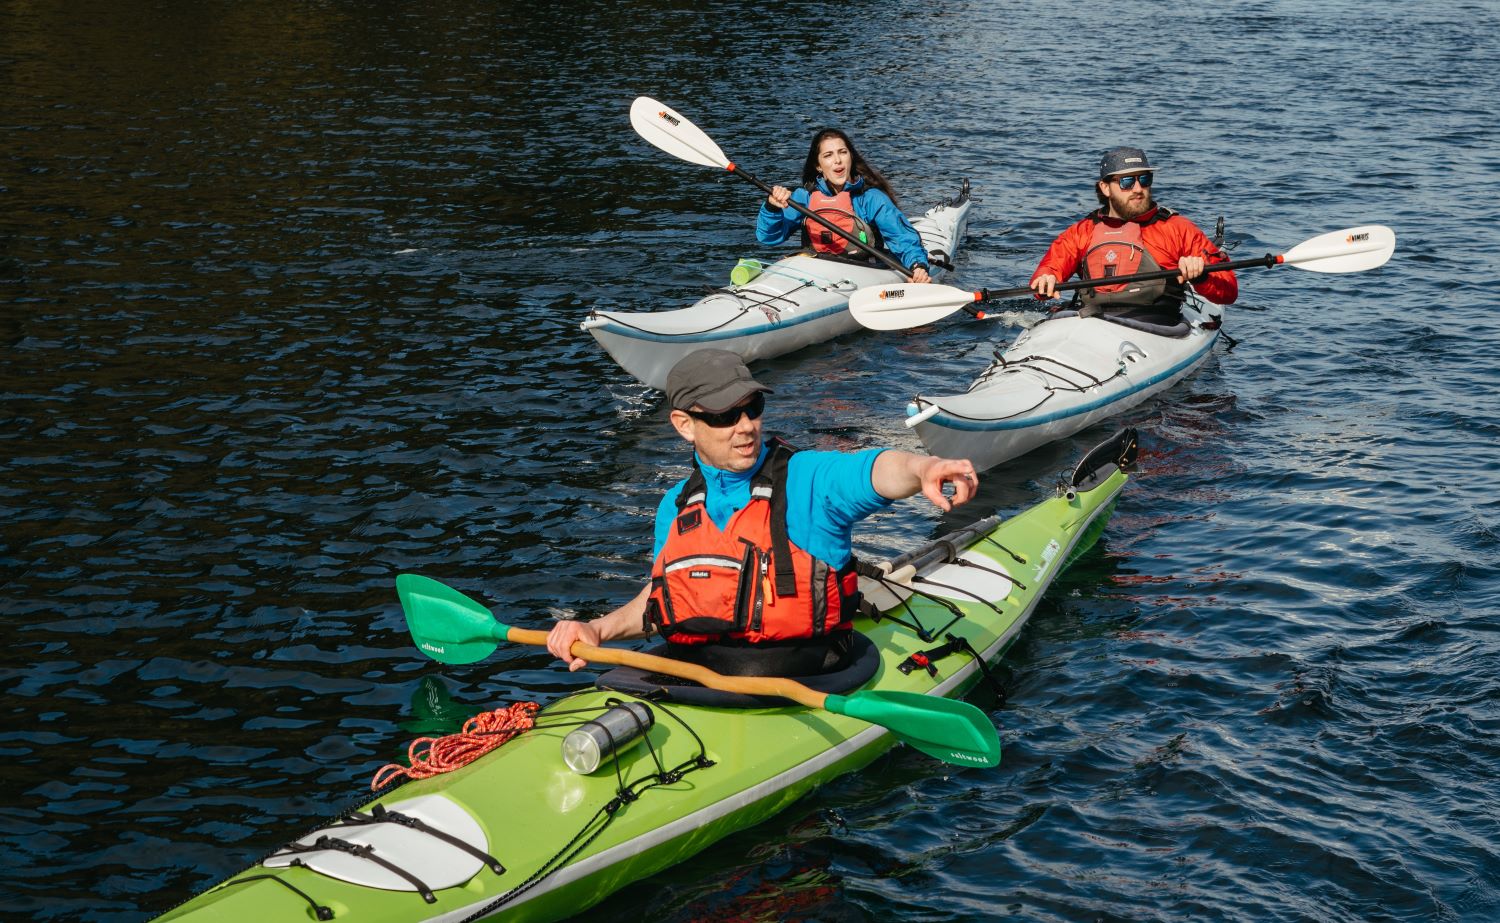 Two kayakers, a man and a woman, paddle in the ocean behind another kayaking man in a ball cap who points ahead.